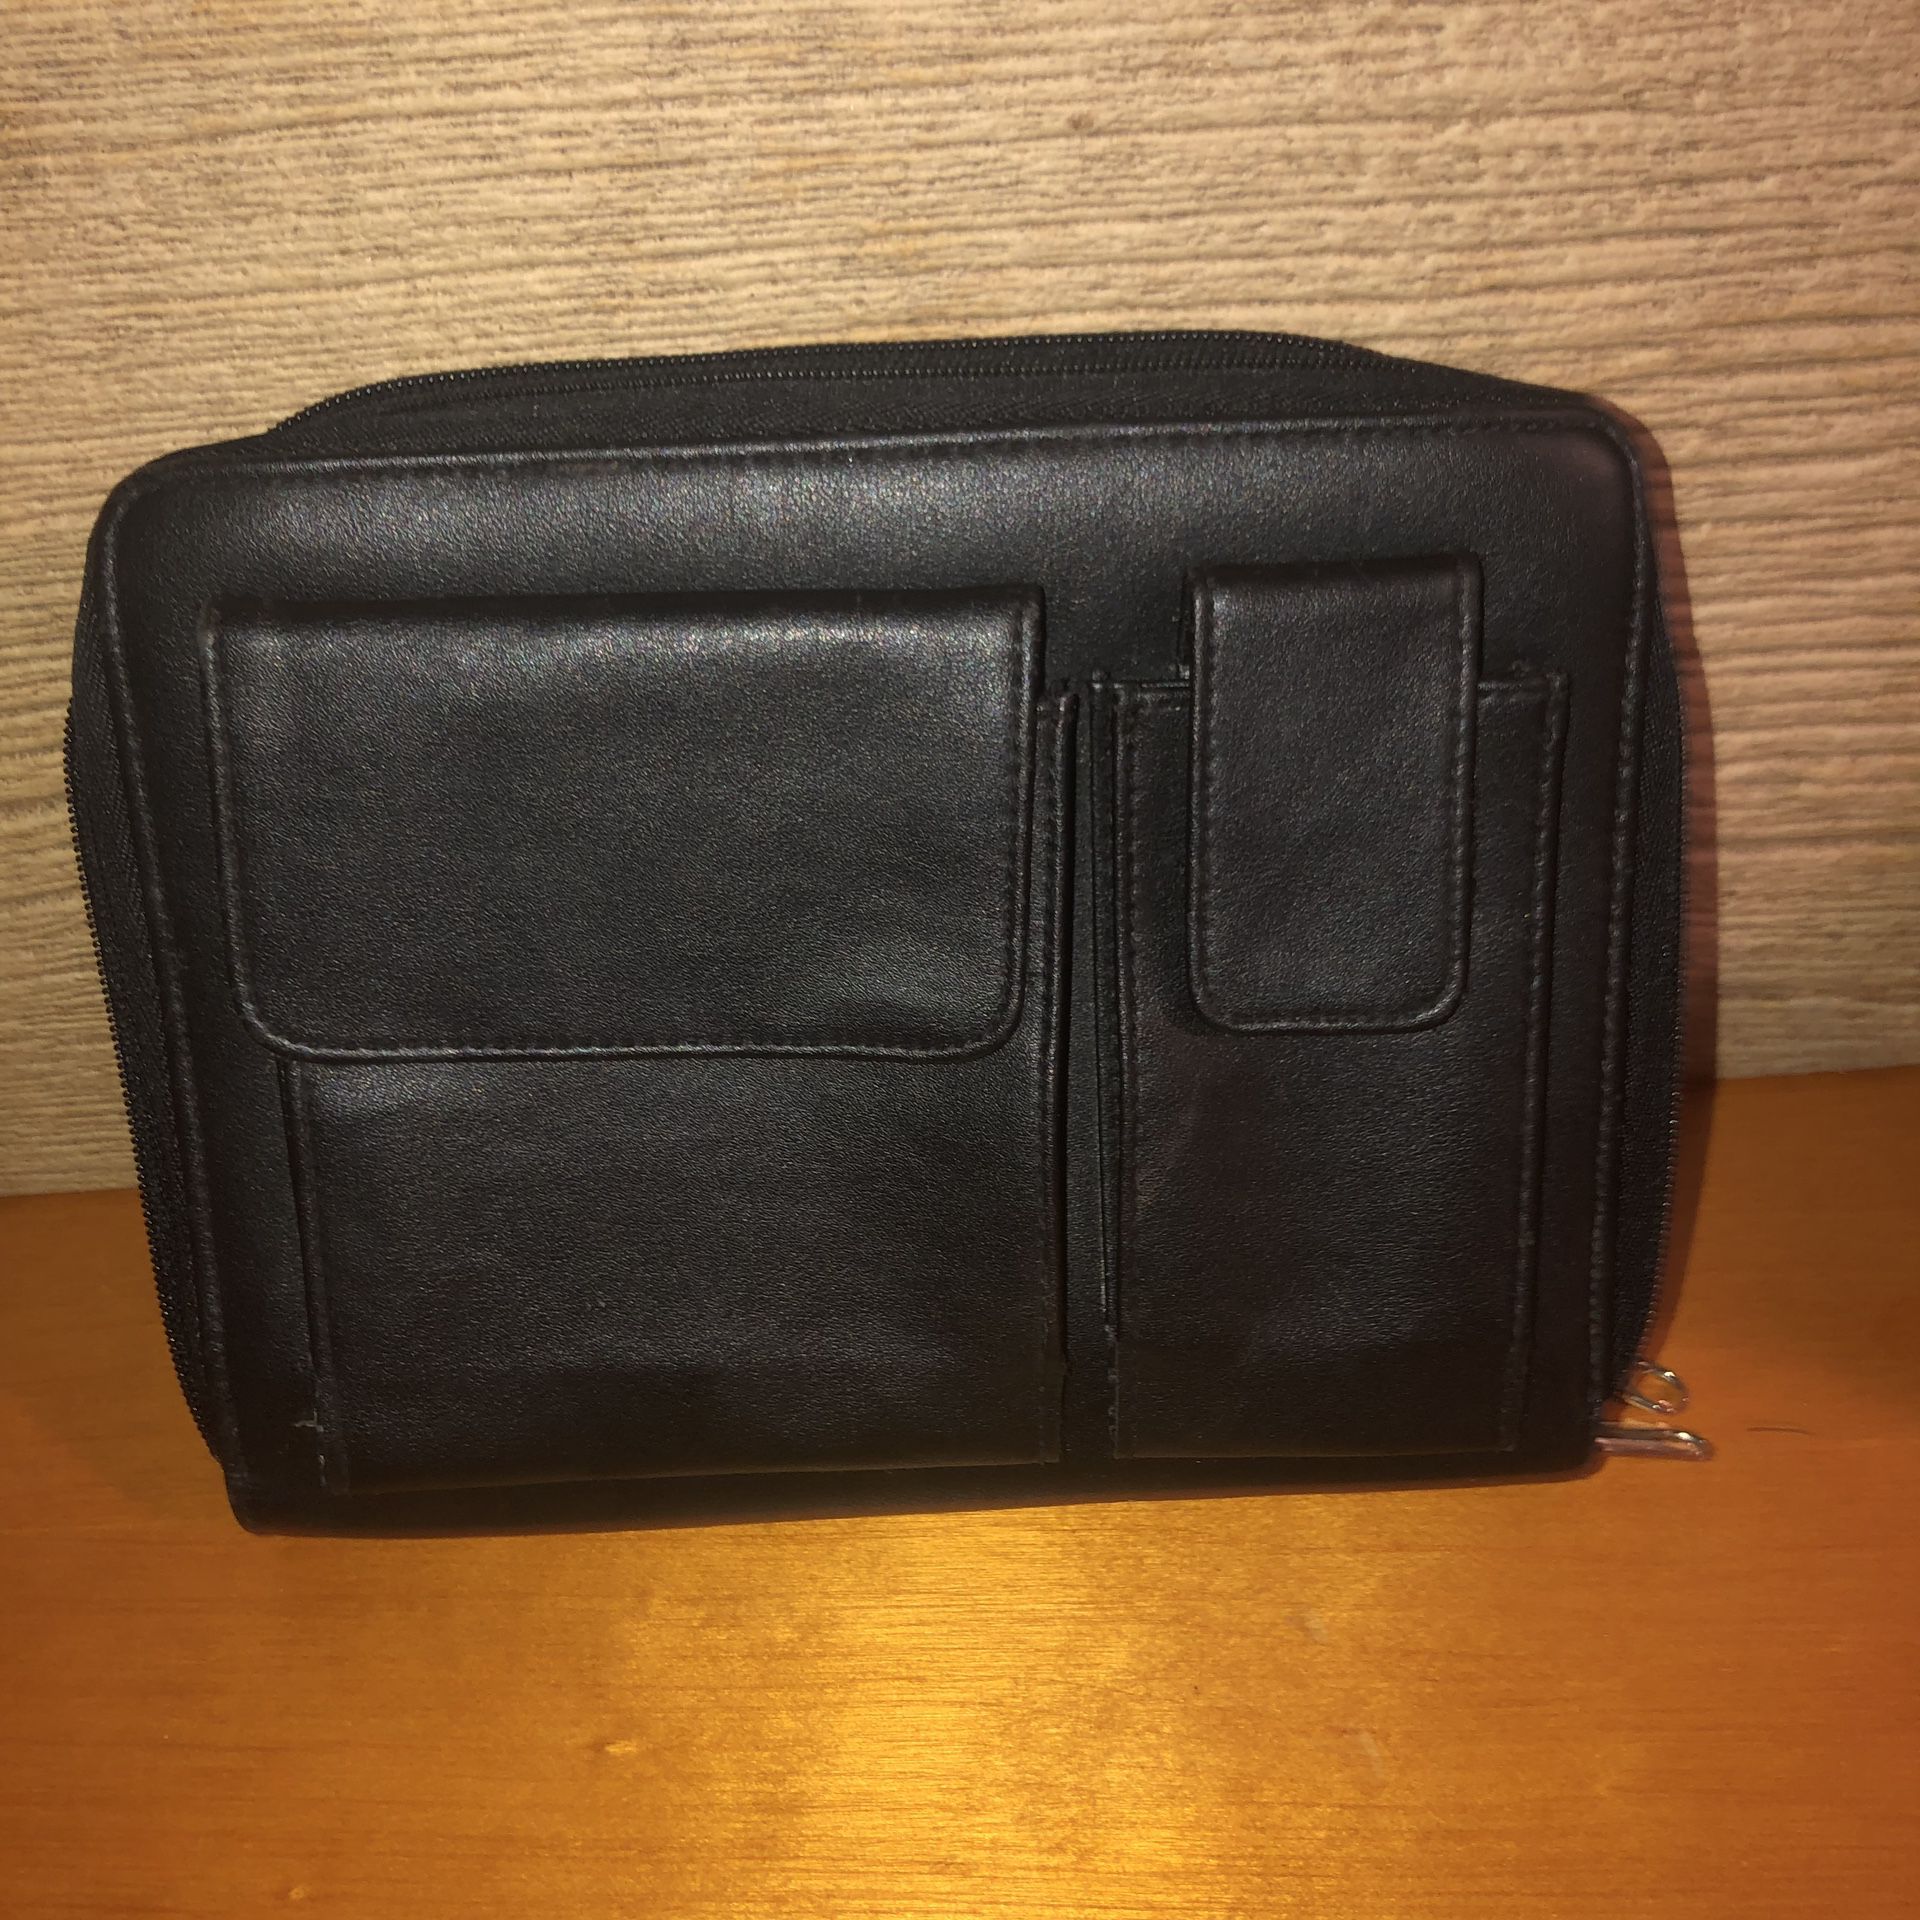 Black leather case/binder/wallet/planner with two zip closures and outside Velcro compartments. There’s a place with 6 rings to put papers or planner